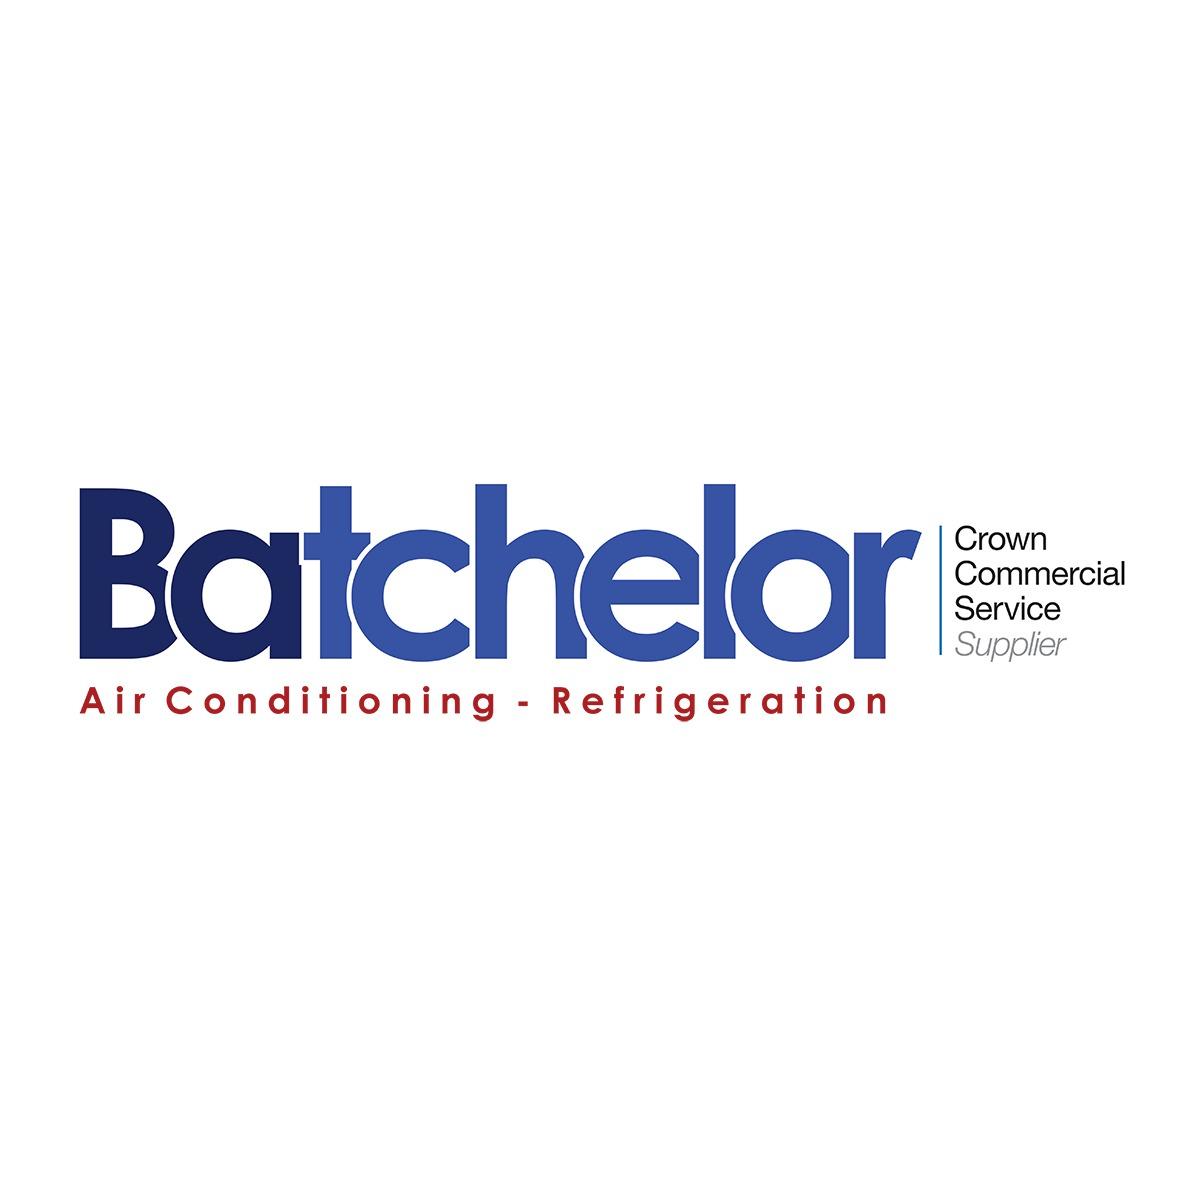 Batchelor Air Conditioning and Refrigeration Ltd Batchelor Air Conditioning & Refrigeration Milton Keynes 01234 712901